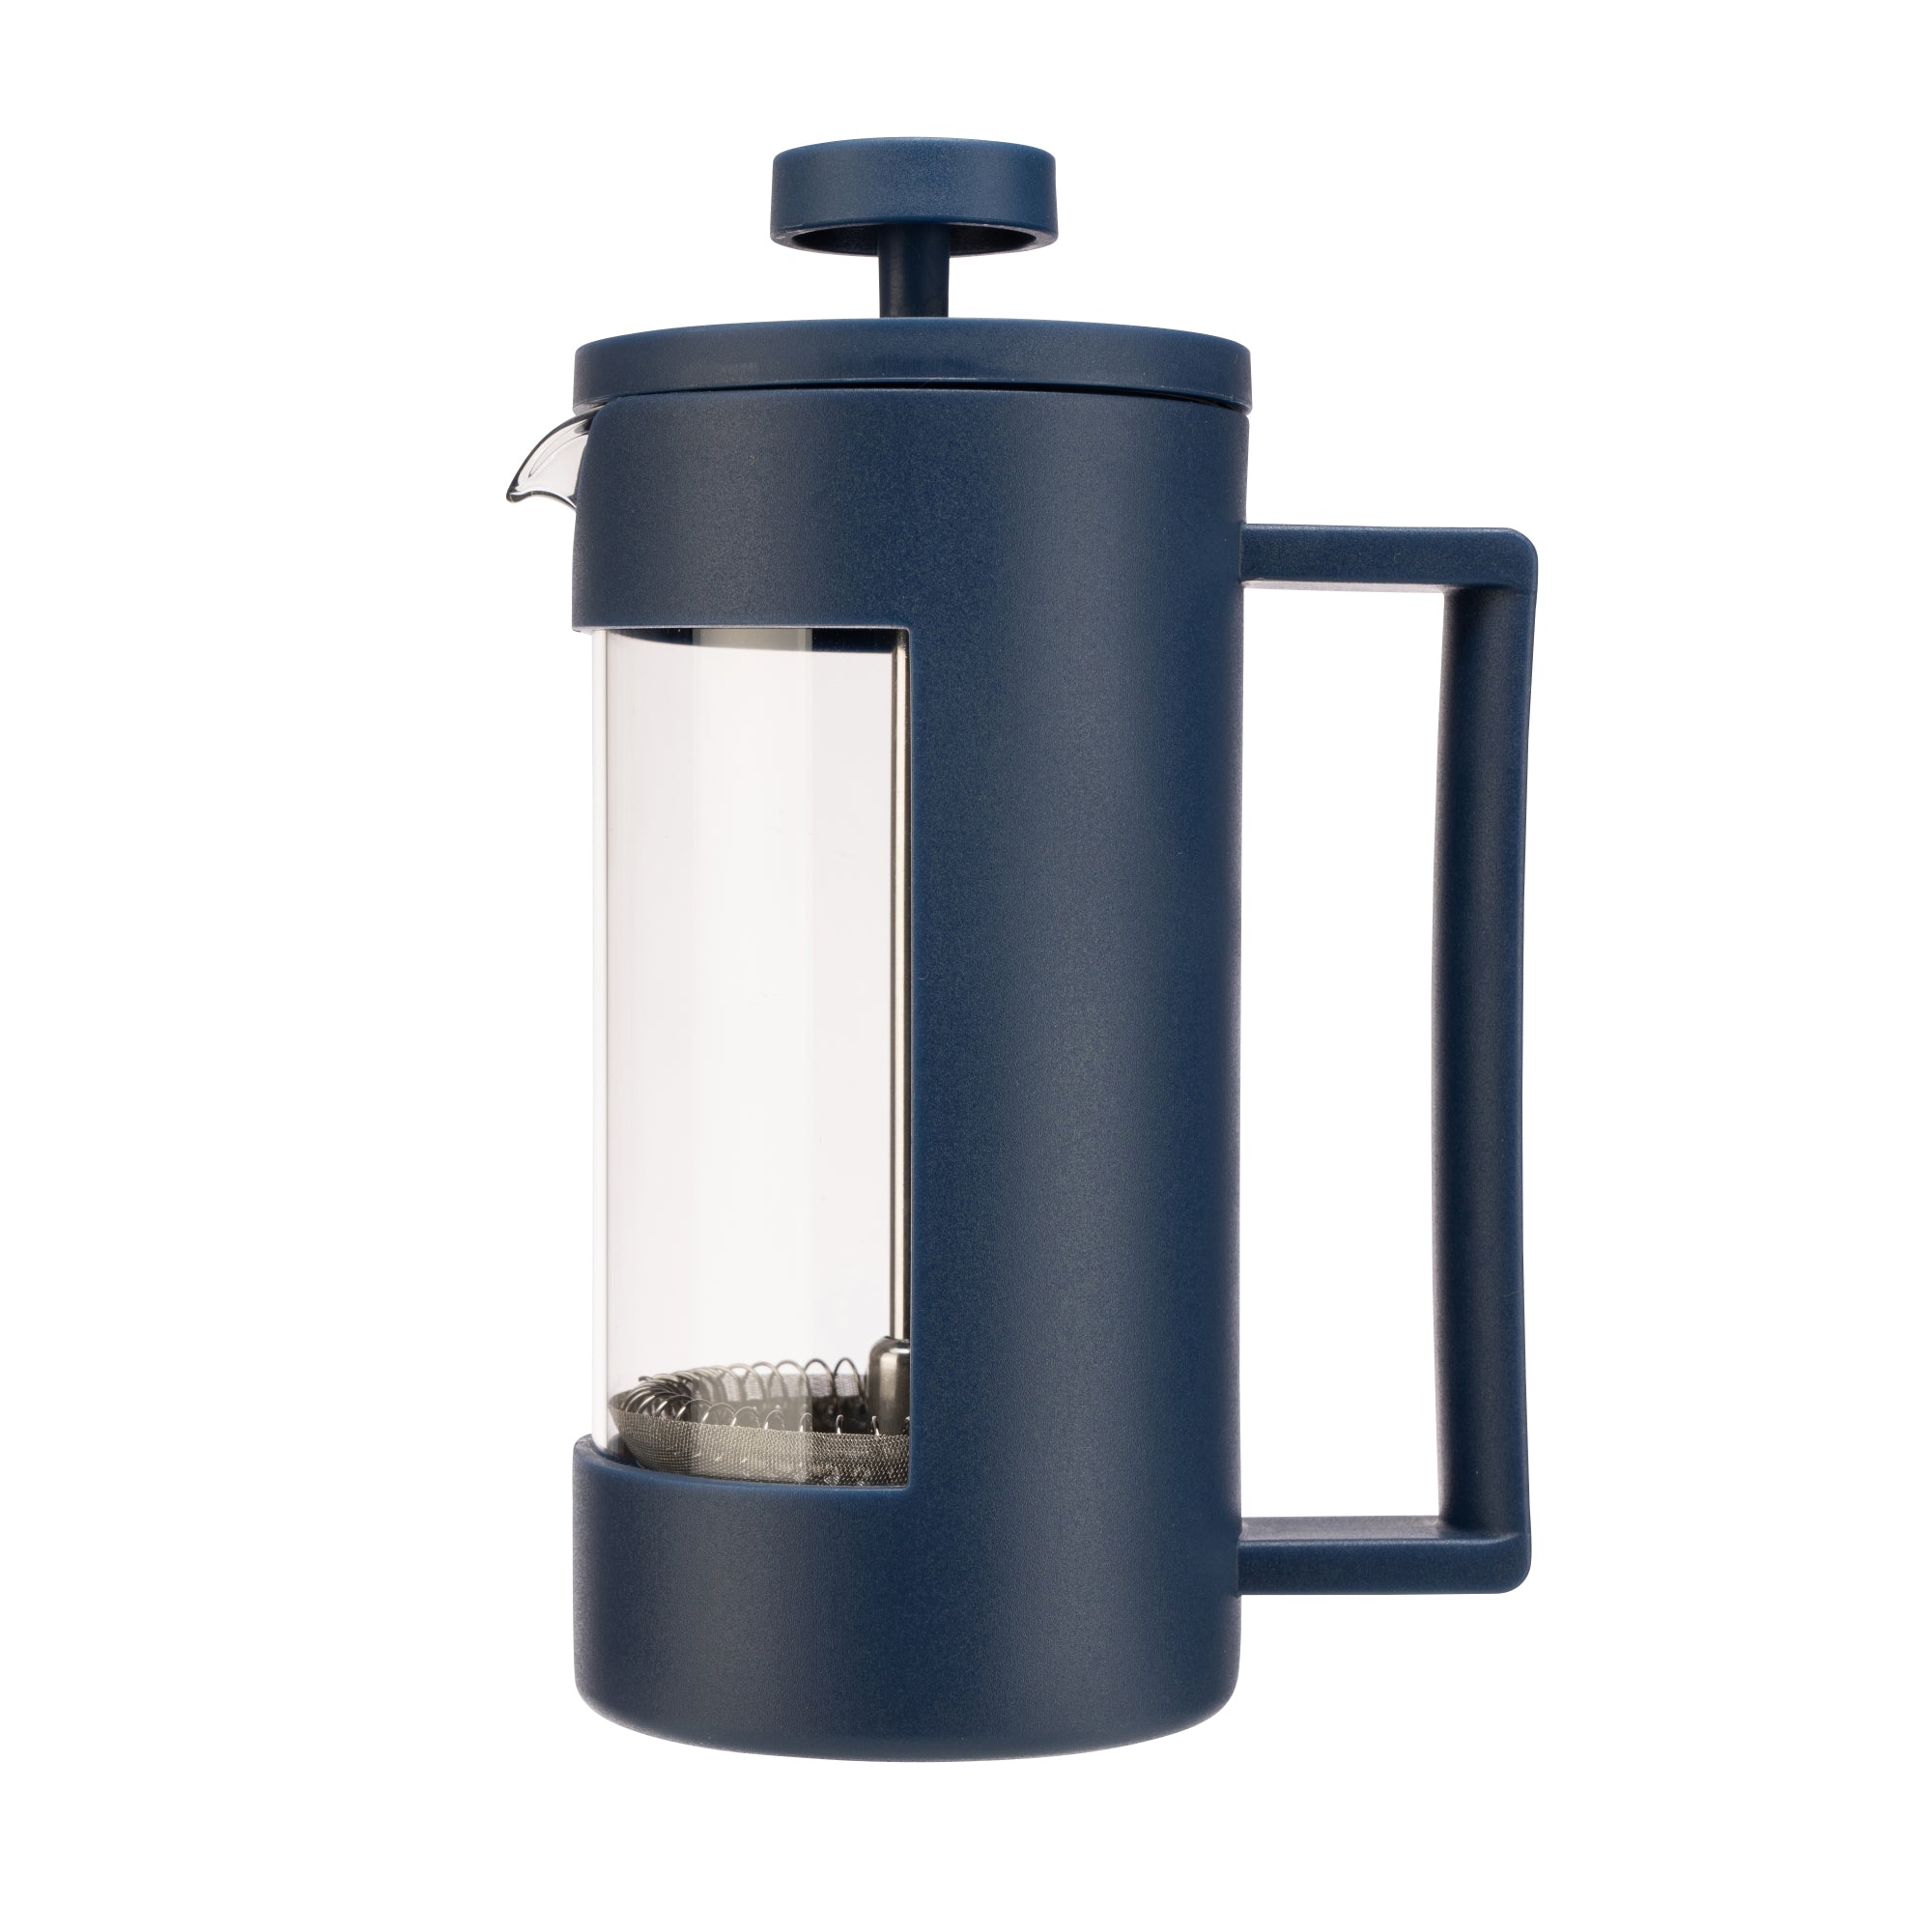 The Home Siip 3 Cup Cafetiere 1 Shaws Department Stores